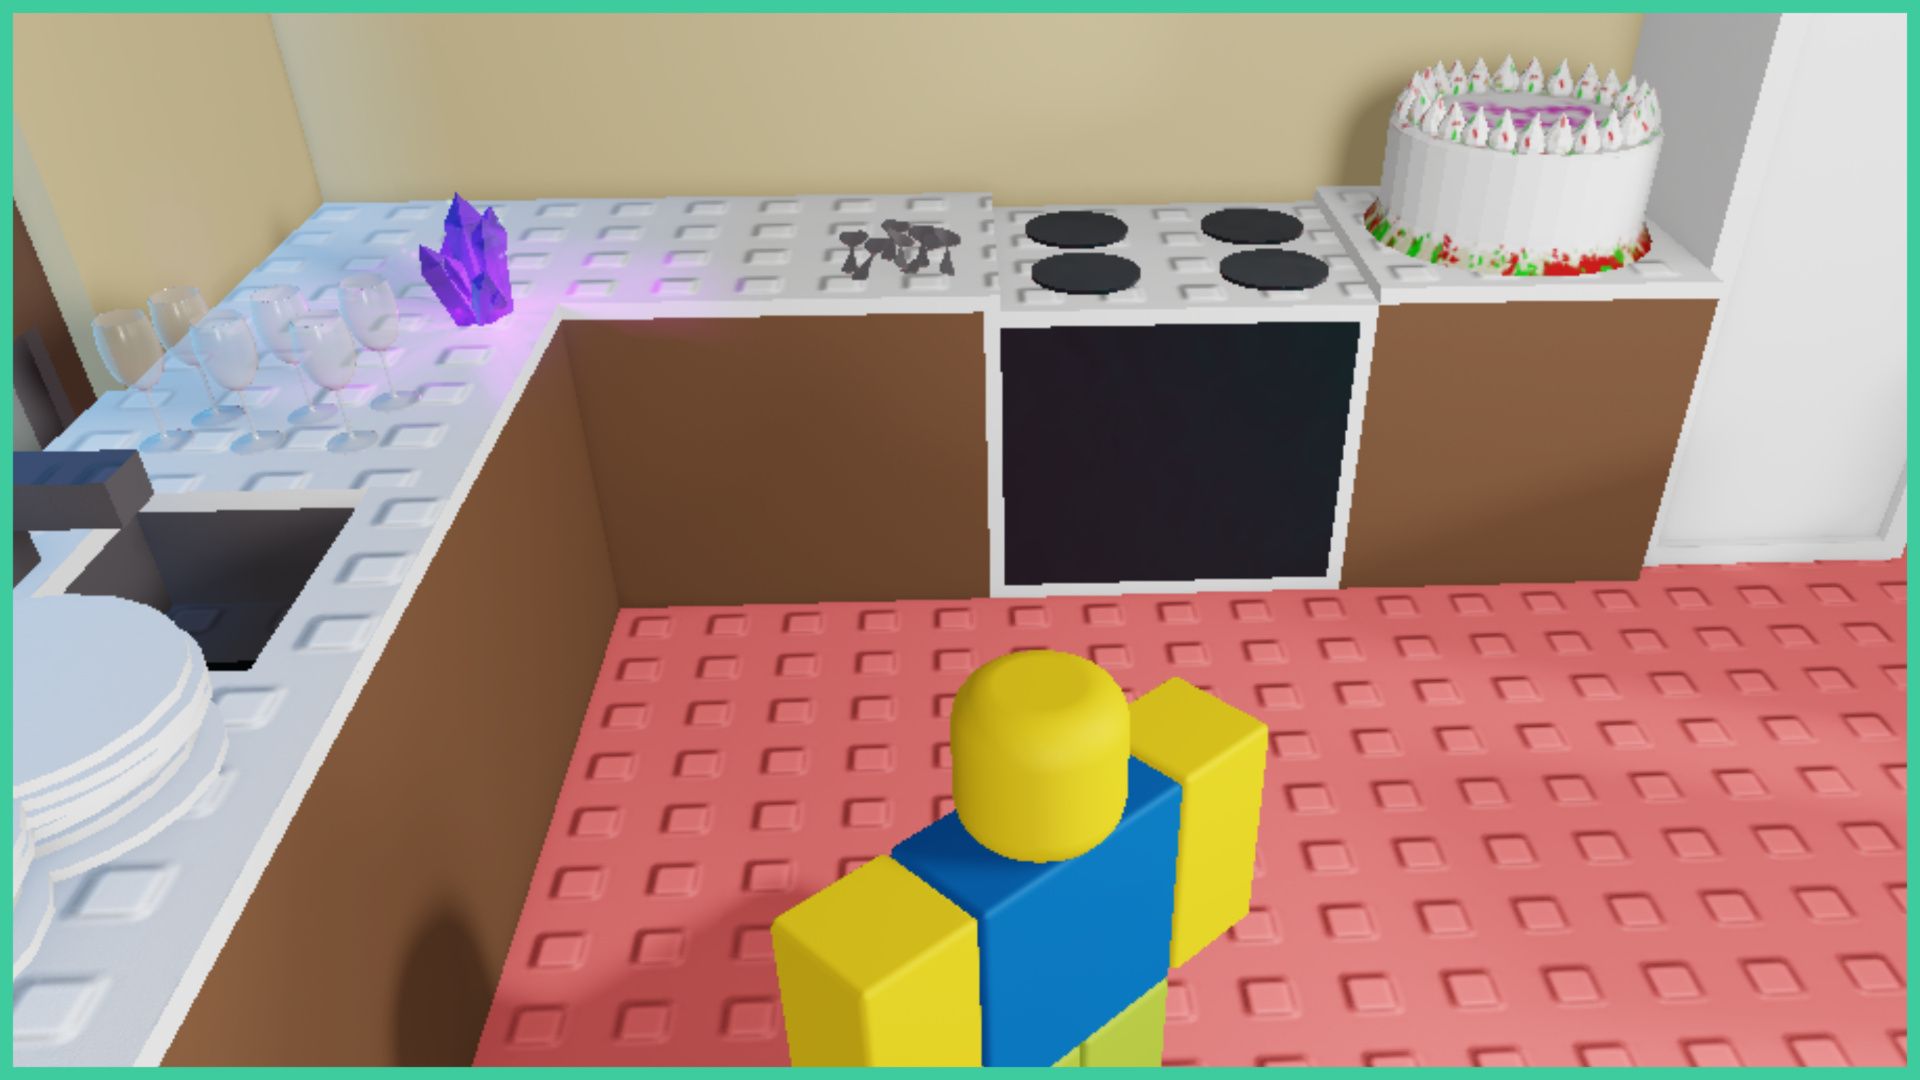 feature image for our need more friends the hunt guide, the image is a screenshot of a roblox avatar standing in a kitchen by the counter, with plates stacked up, a sink, a birthday cake to the right, an oven with hobs, and wine glasses. There is also a glowing purple crystal on the counter